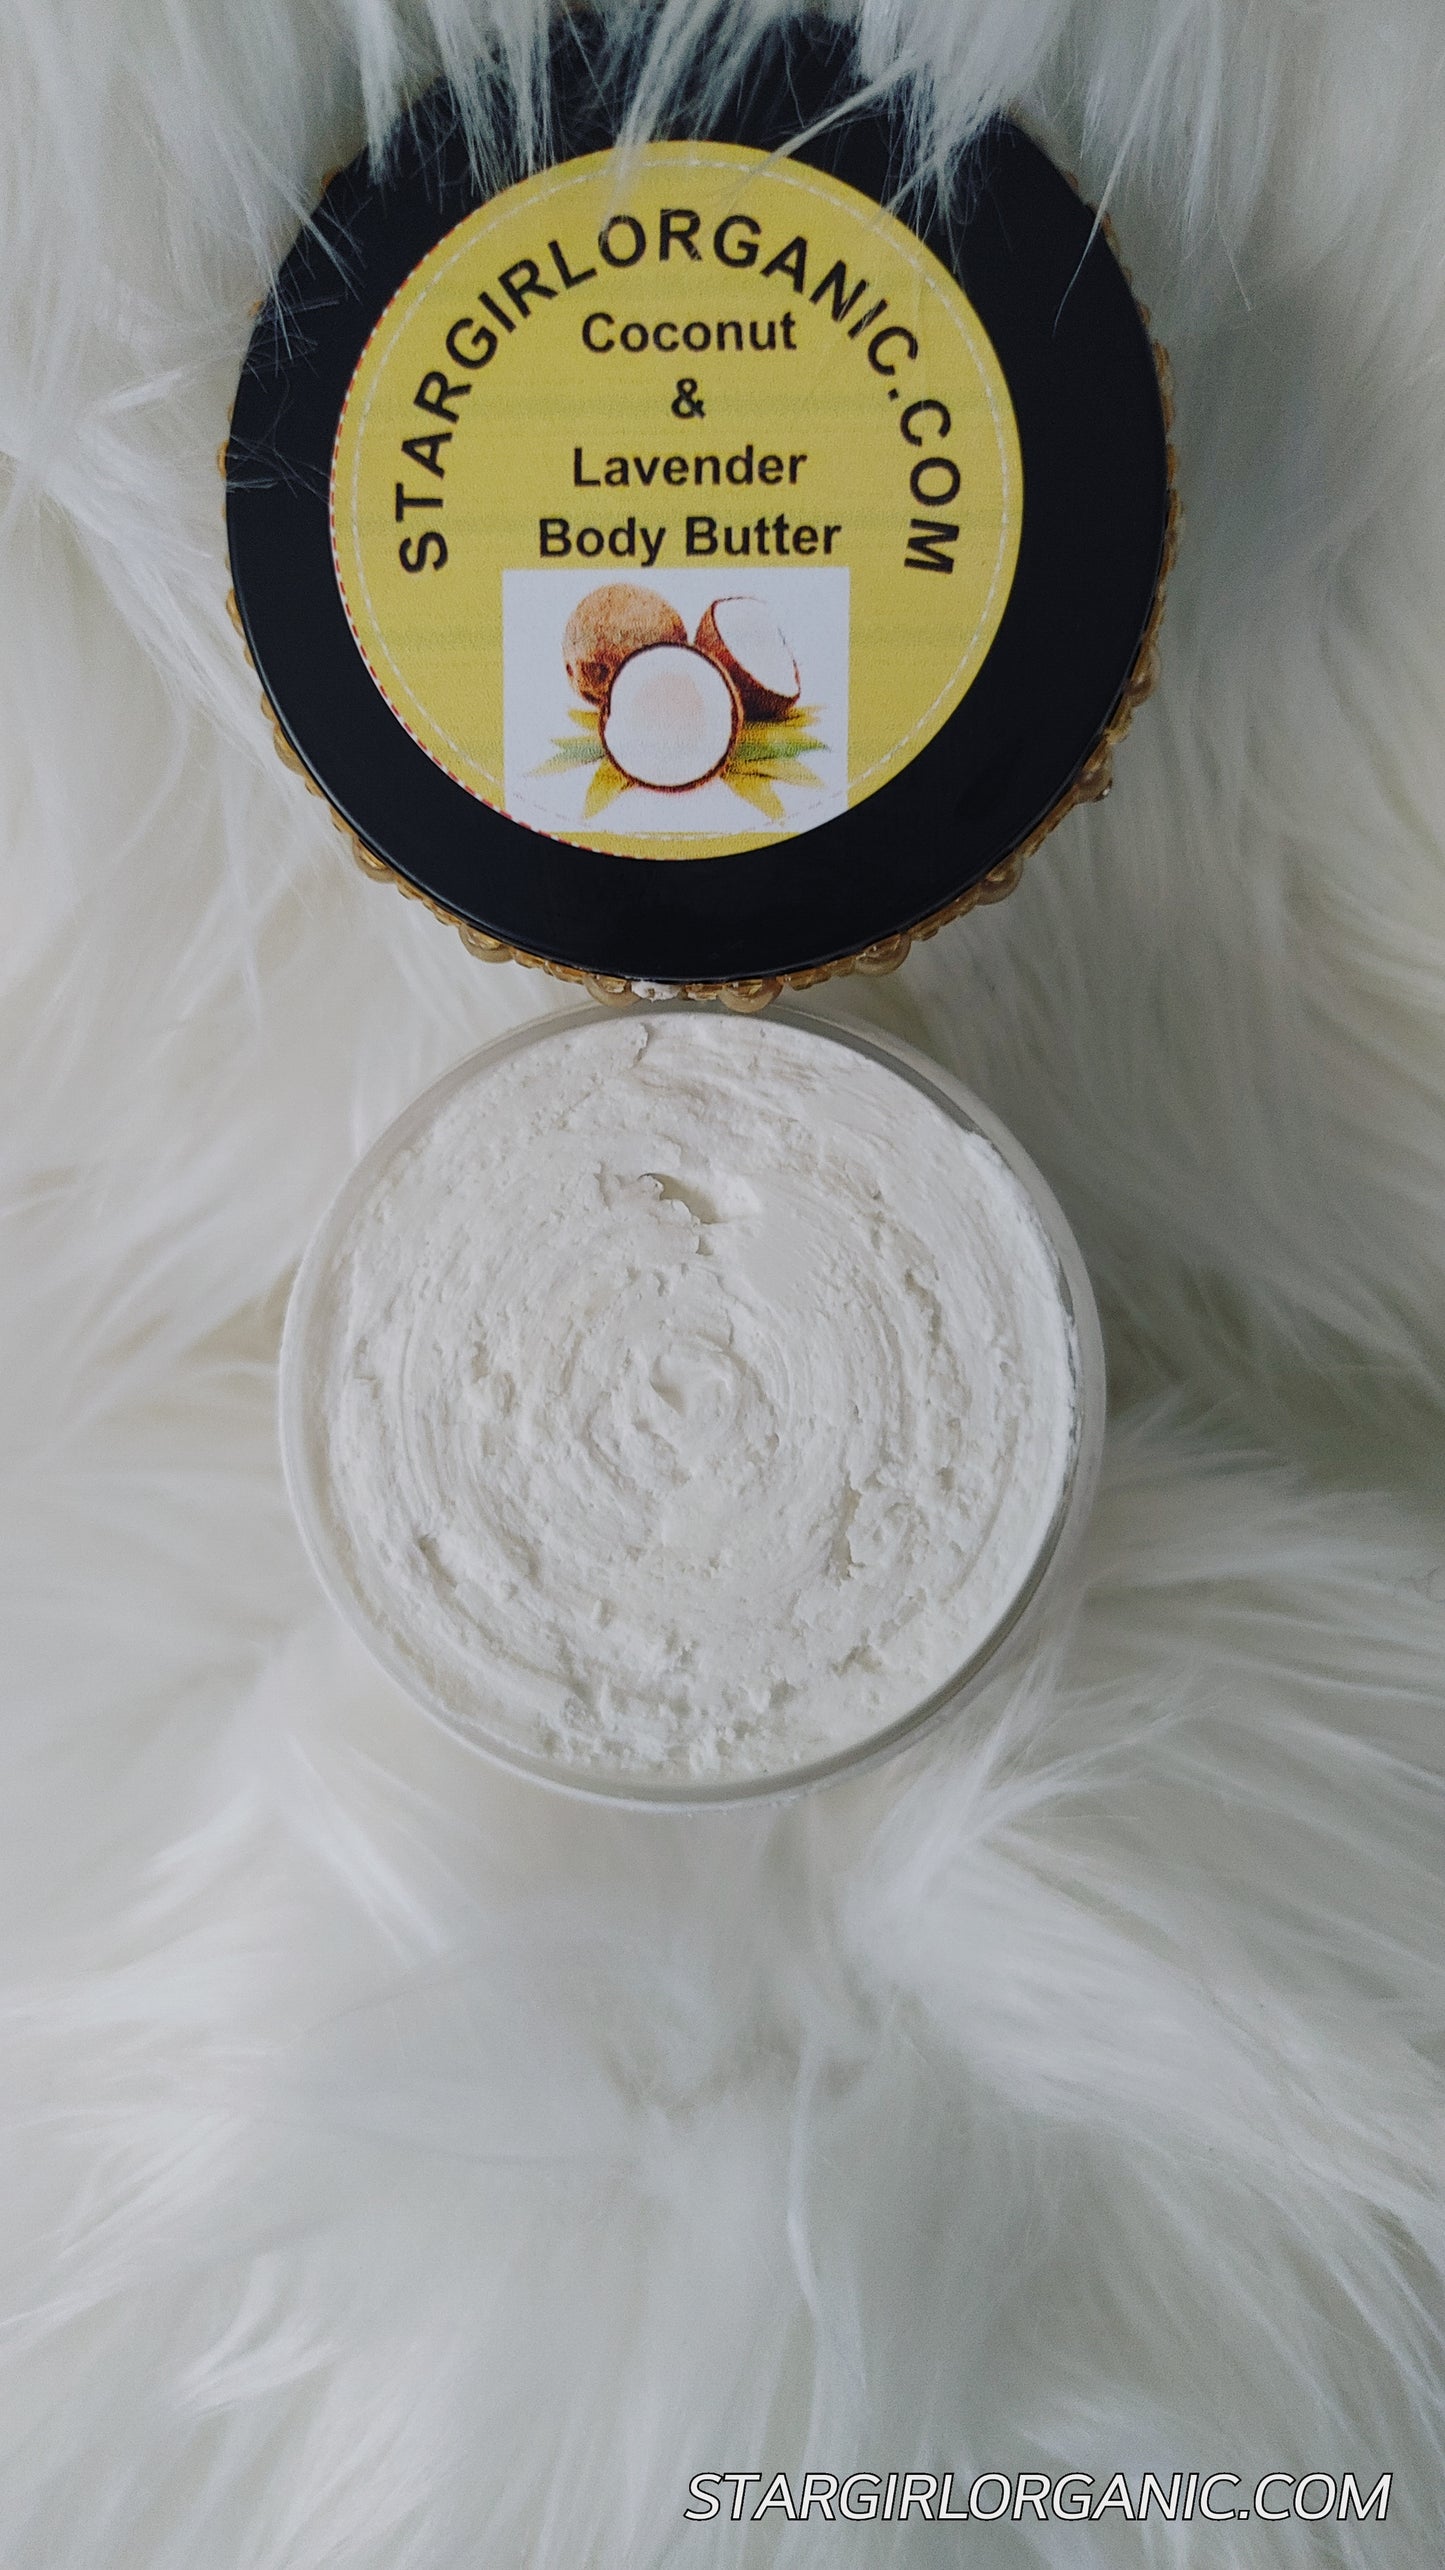 Coconut & Lavender Whipped Body Butter